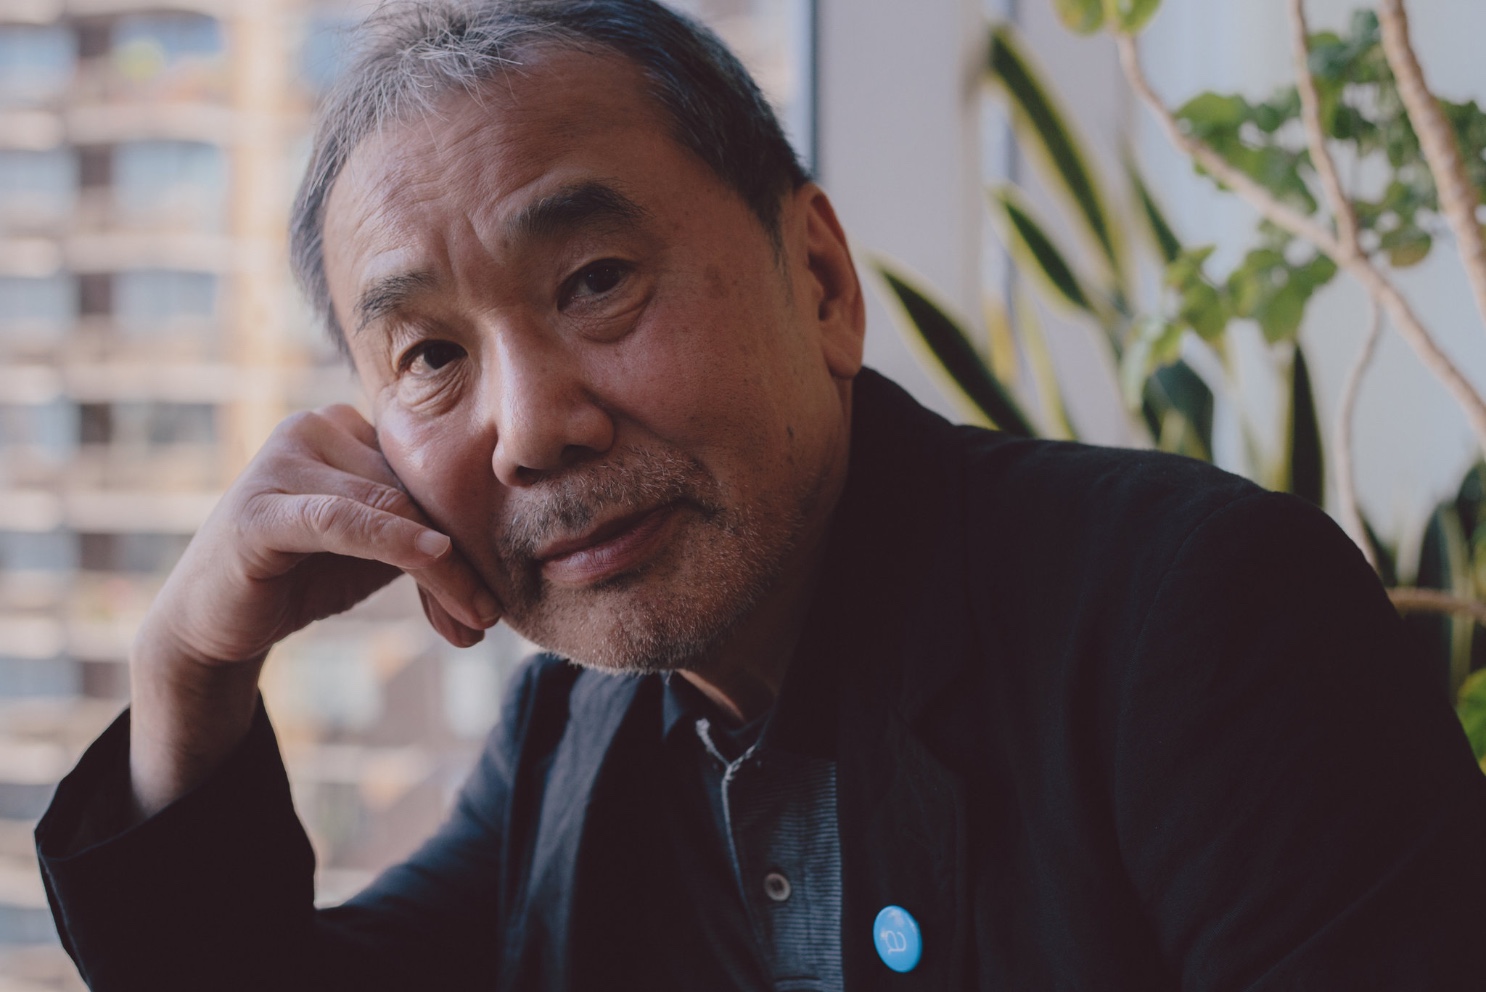 Haruki Murakami's Writing Routine: “I mesmerize myself to reach a deeper  state of mind.” - Famous Writing Routines